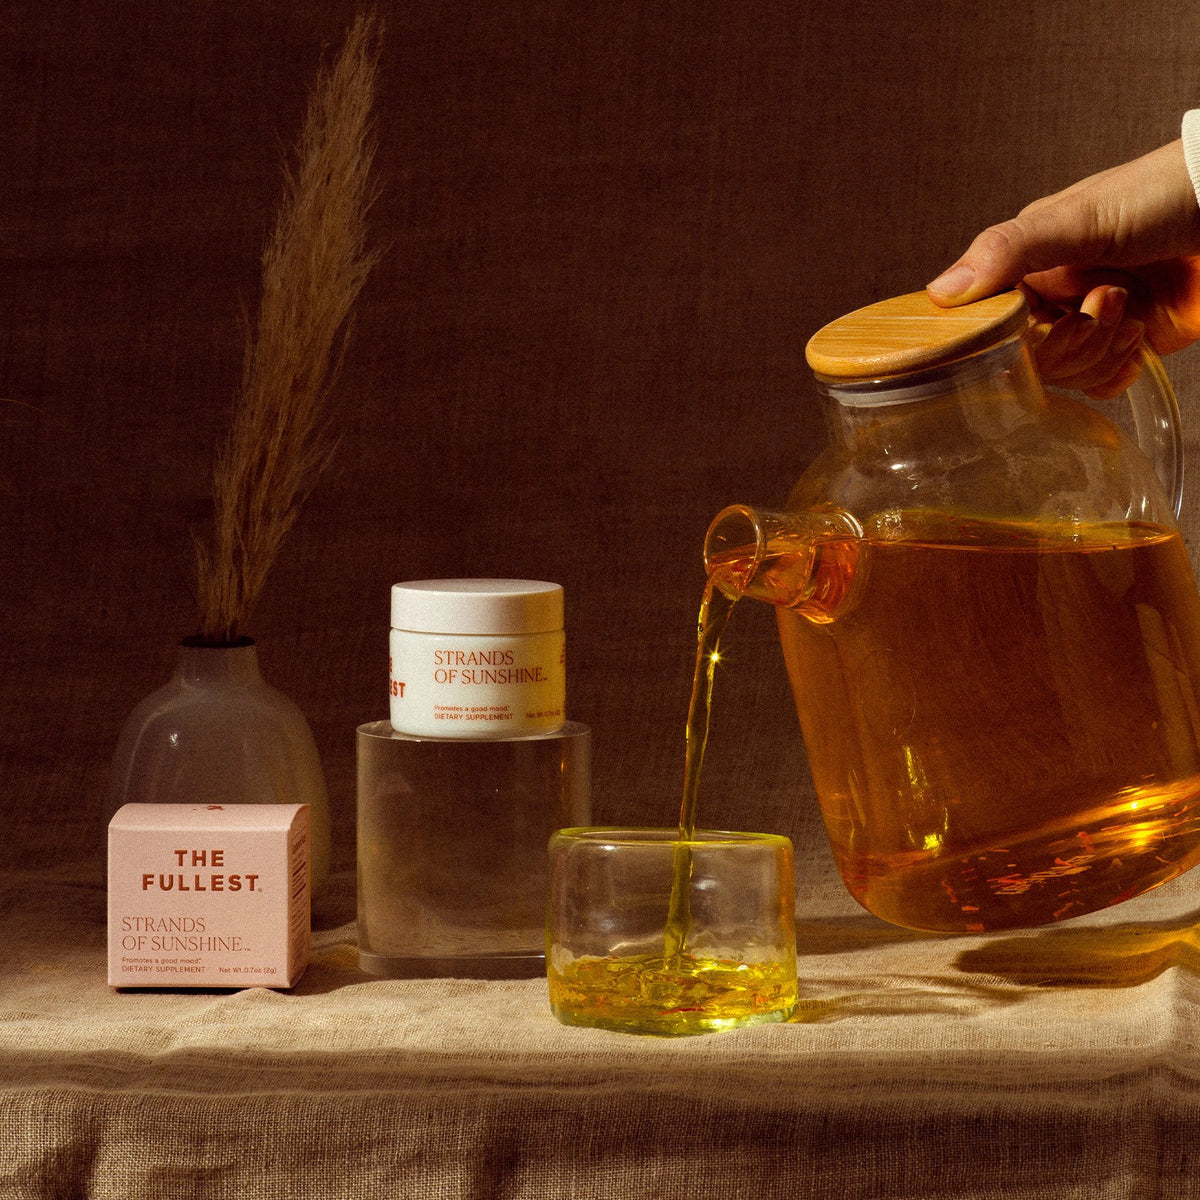 A model pouring a golden saffron tea from a glass tea pot into a small cup on a draped cloth surface, with decorative bottles and Strands of Sunshine threads nearby by THE FULLEST.